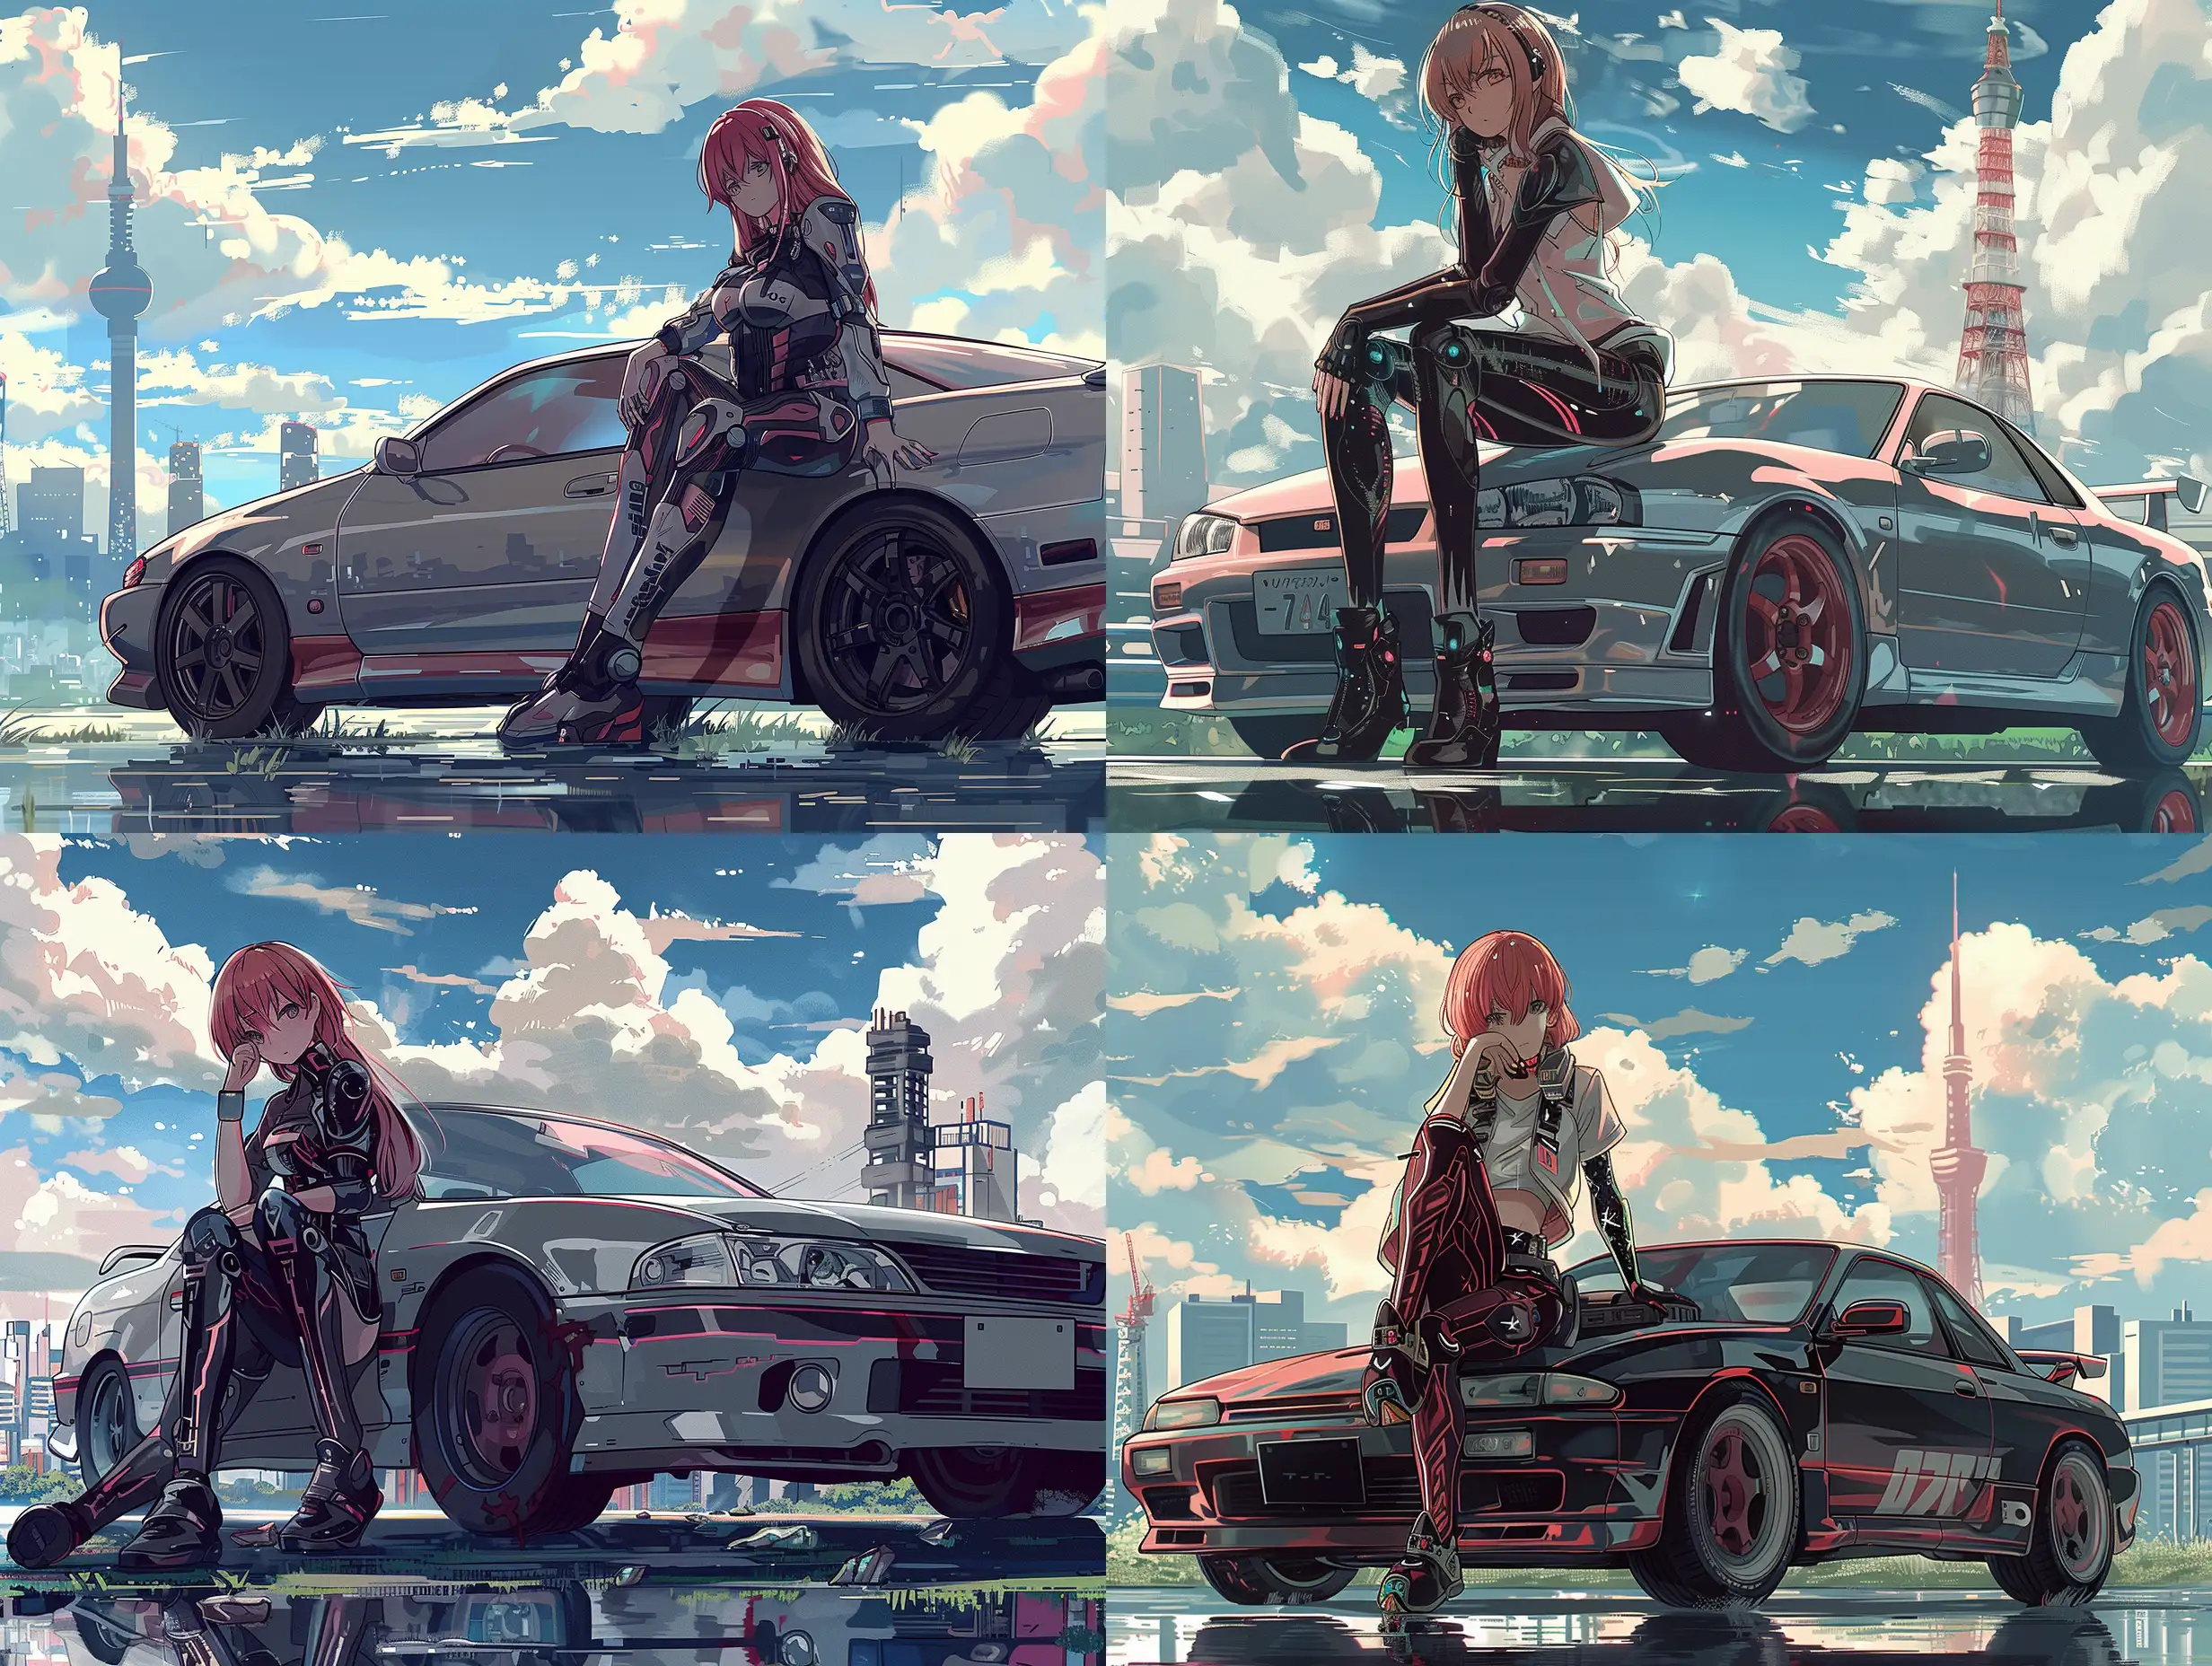 Cyberpunk-Anime-Character-Leaning-on-Car-Outside-the-City-in-Biker-Suit